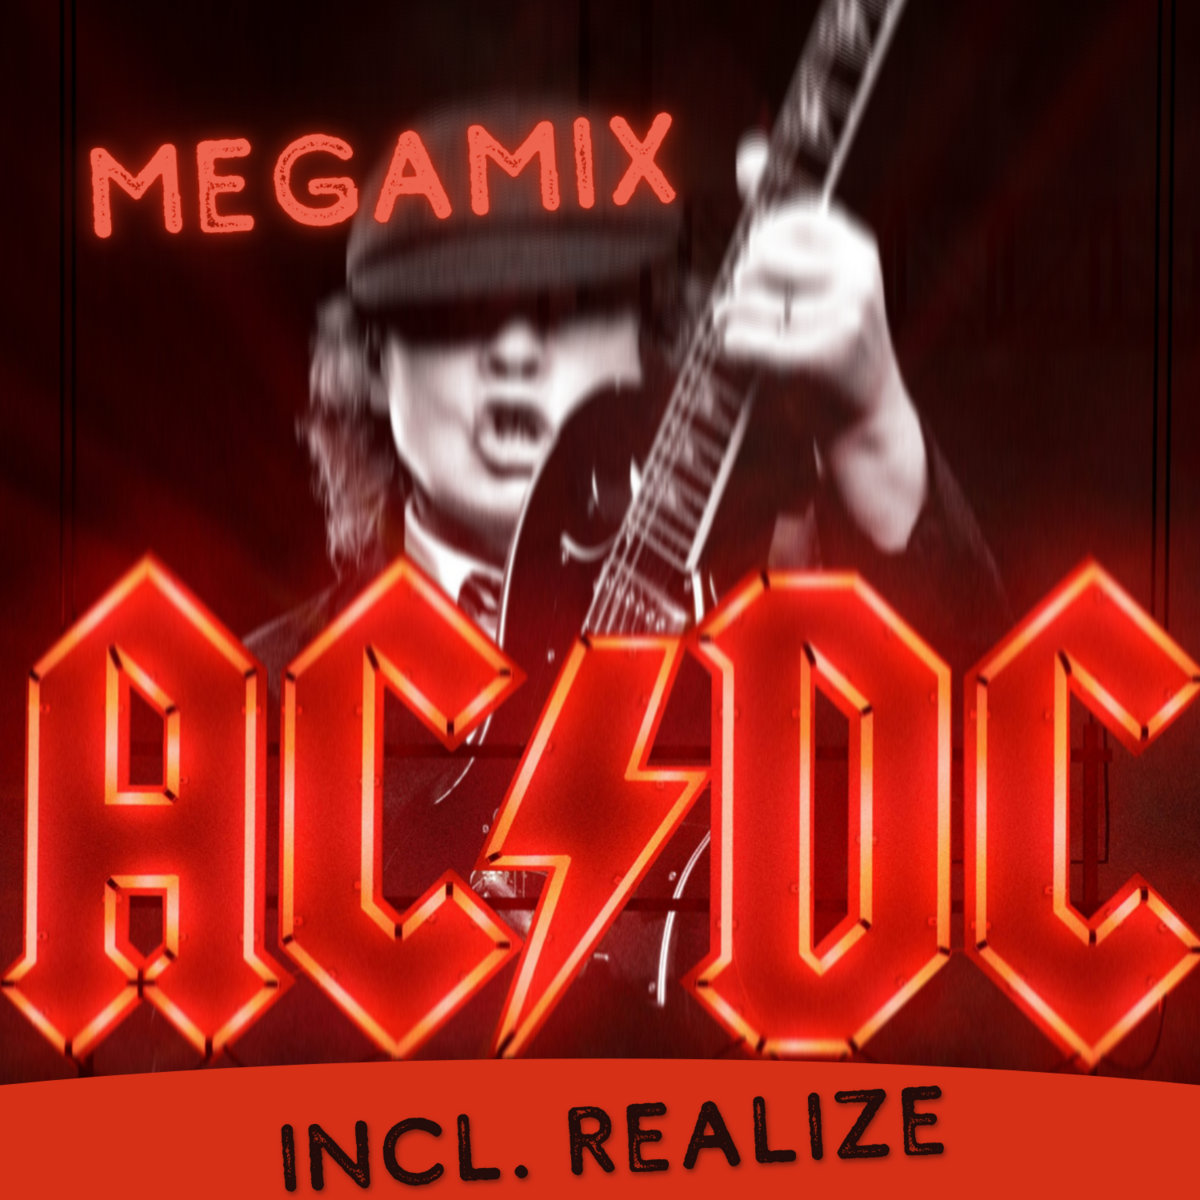 Ac Dc Iphone Wallpapers